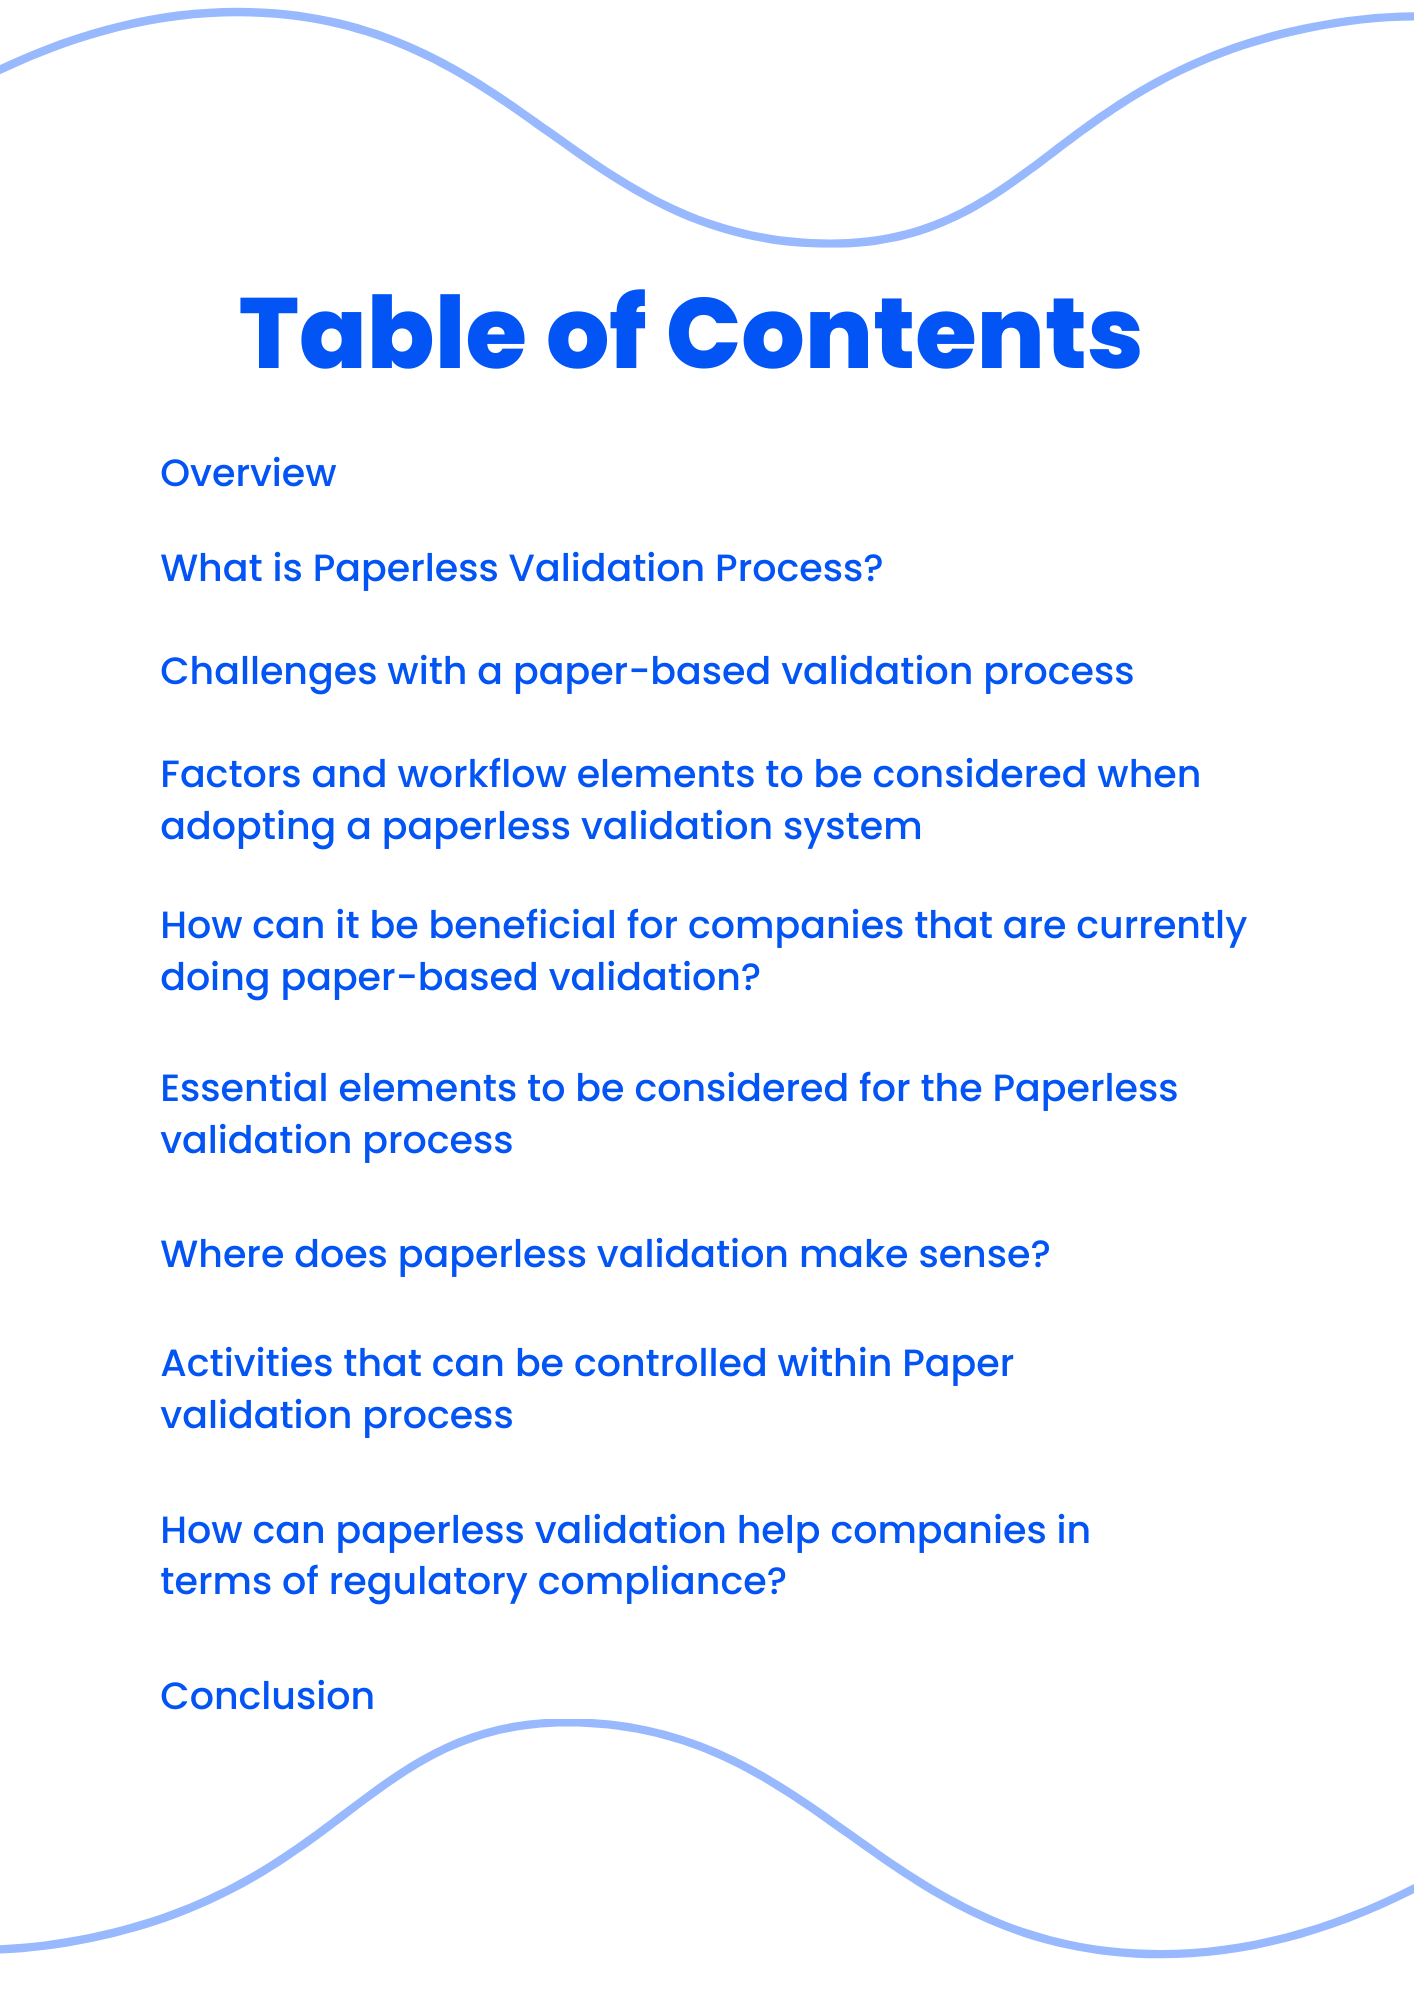 Table of contents for paperless validation process by PSC Biotech